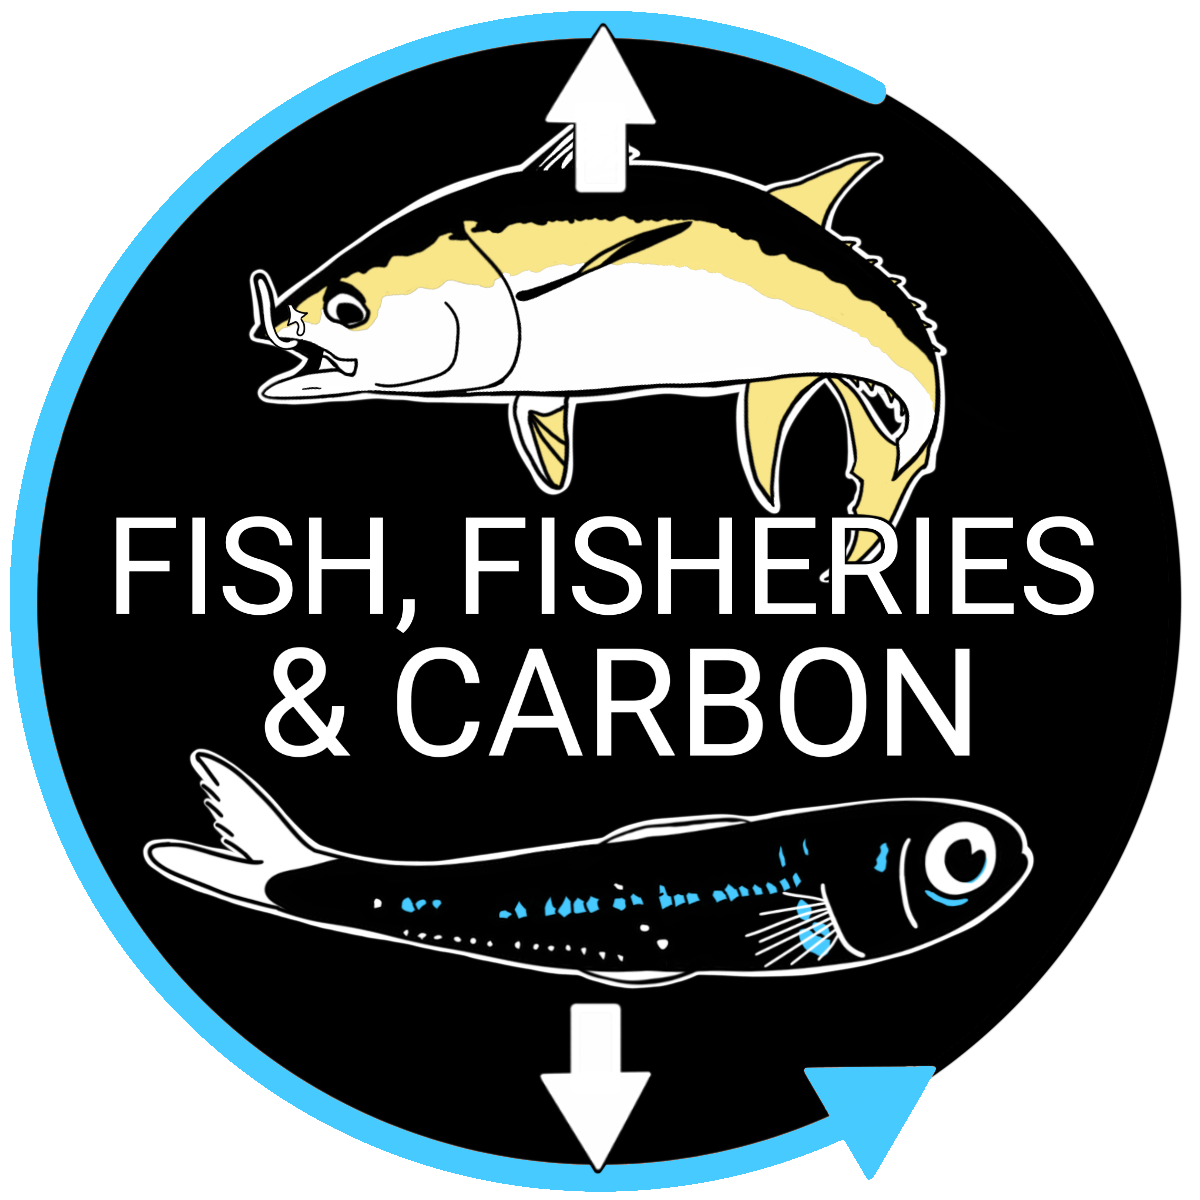 OCB Fish, Fisheries and Carbon meeting